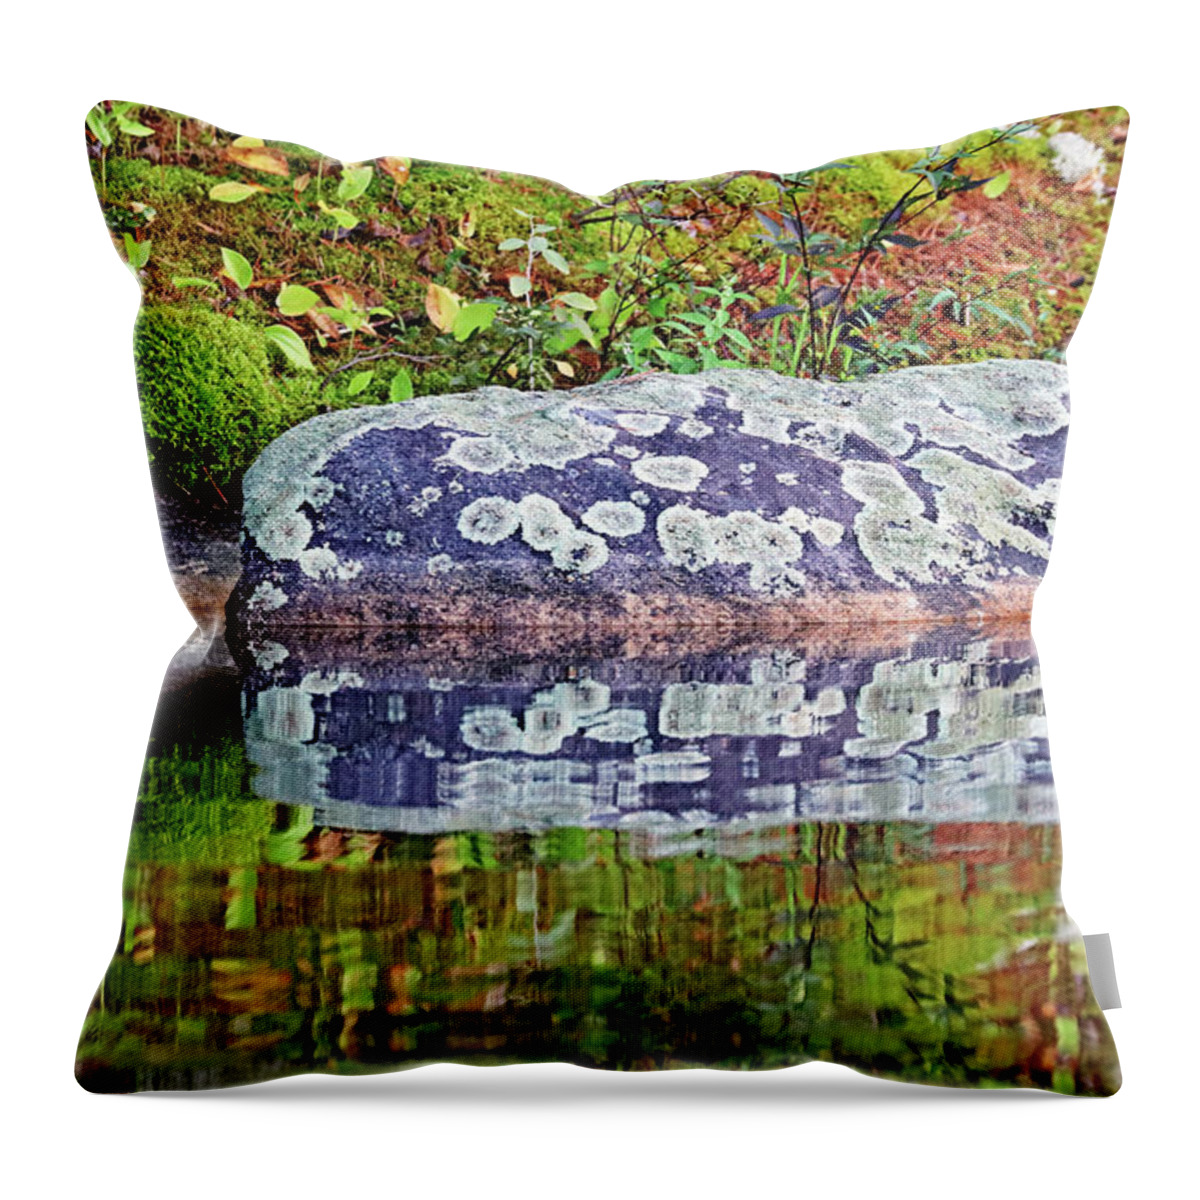 Shawanaga River Throw Pillow featuring the photograph Shawanaga Rock And Reflections by Debbie Oppermann